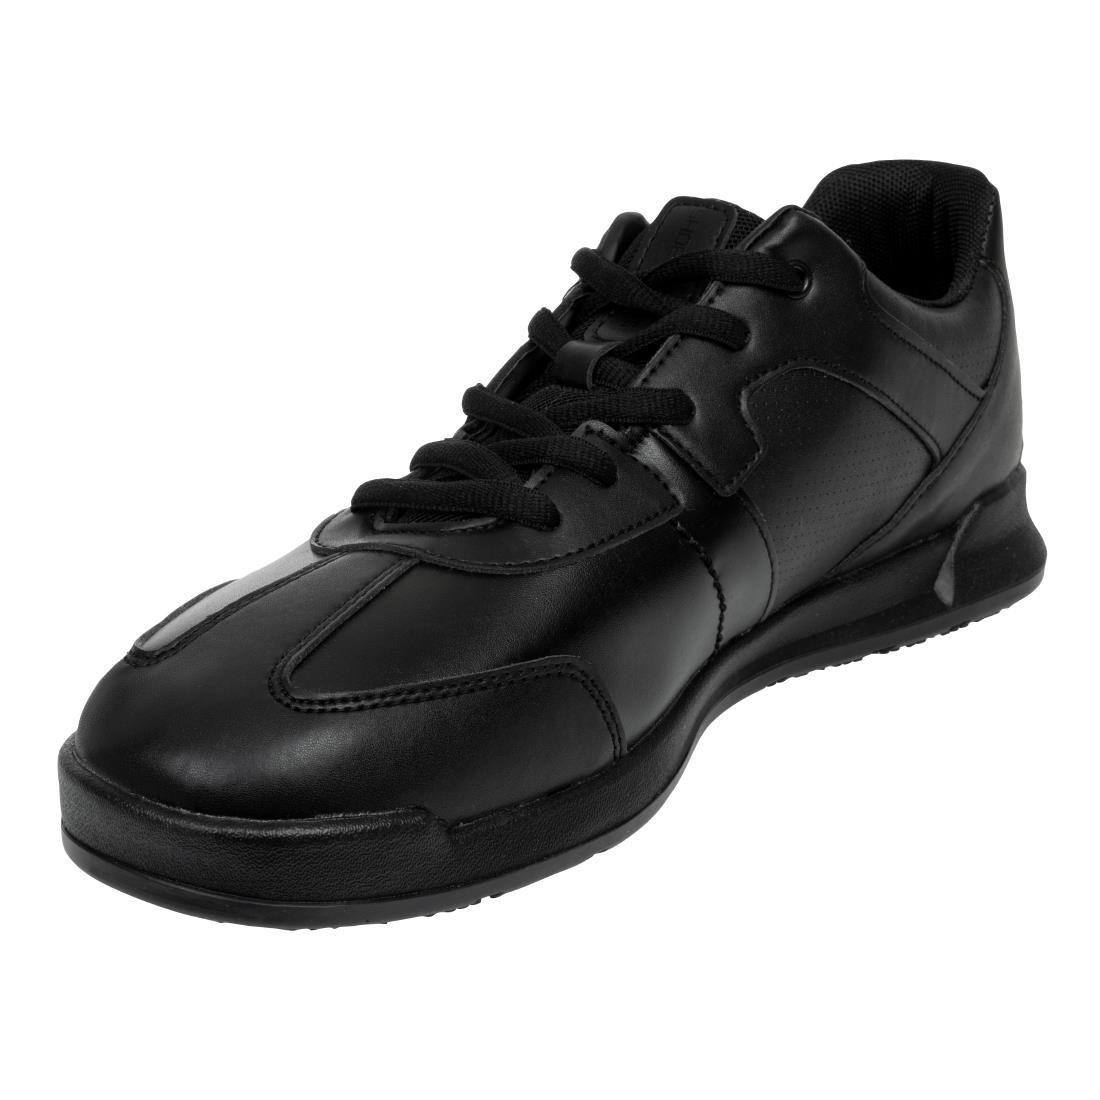 BB585-43 Shoes for Crews Freestyle Trainers Black Size 43